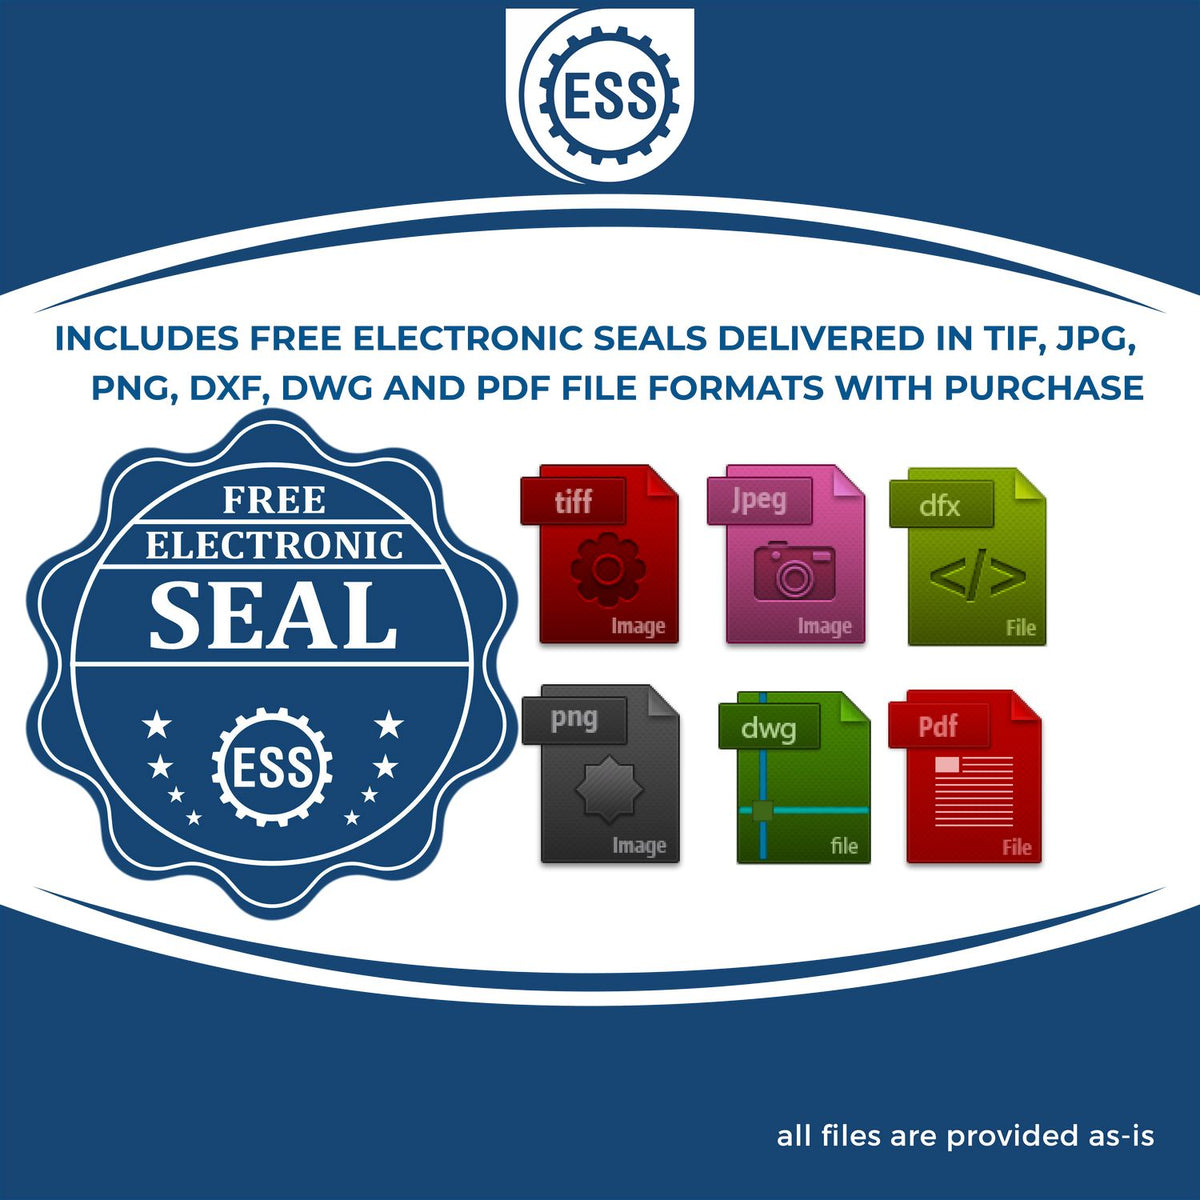 An infographic for the free electronic seal for the State of New York Extended Long Reach Geologist Seal illustrating the different file type icons such as DXF, DWG, TIF, JPG and PNG.